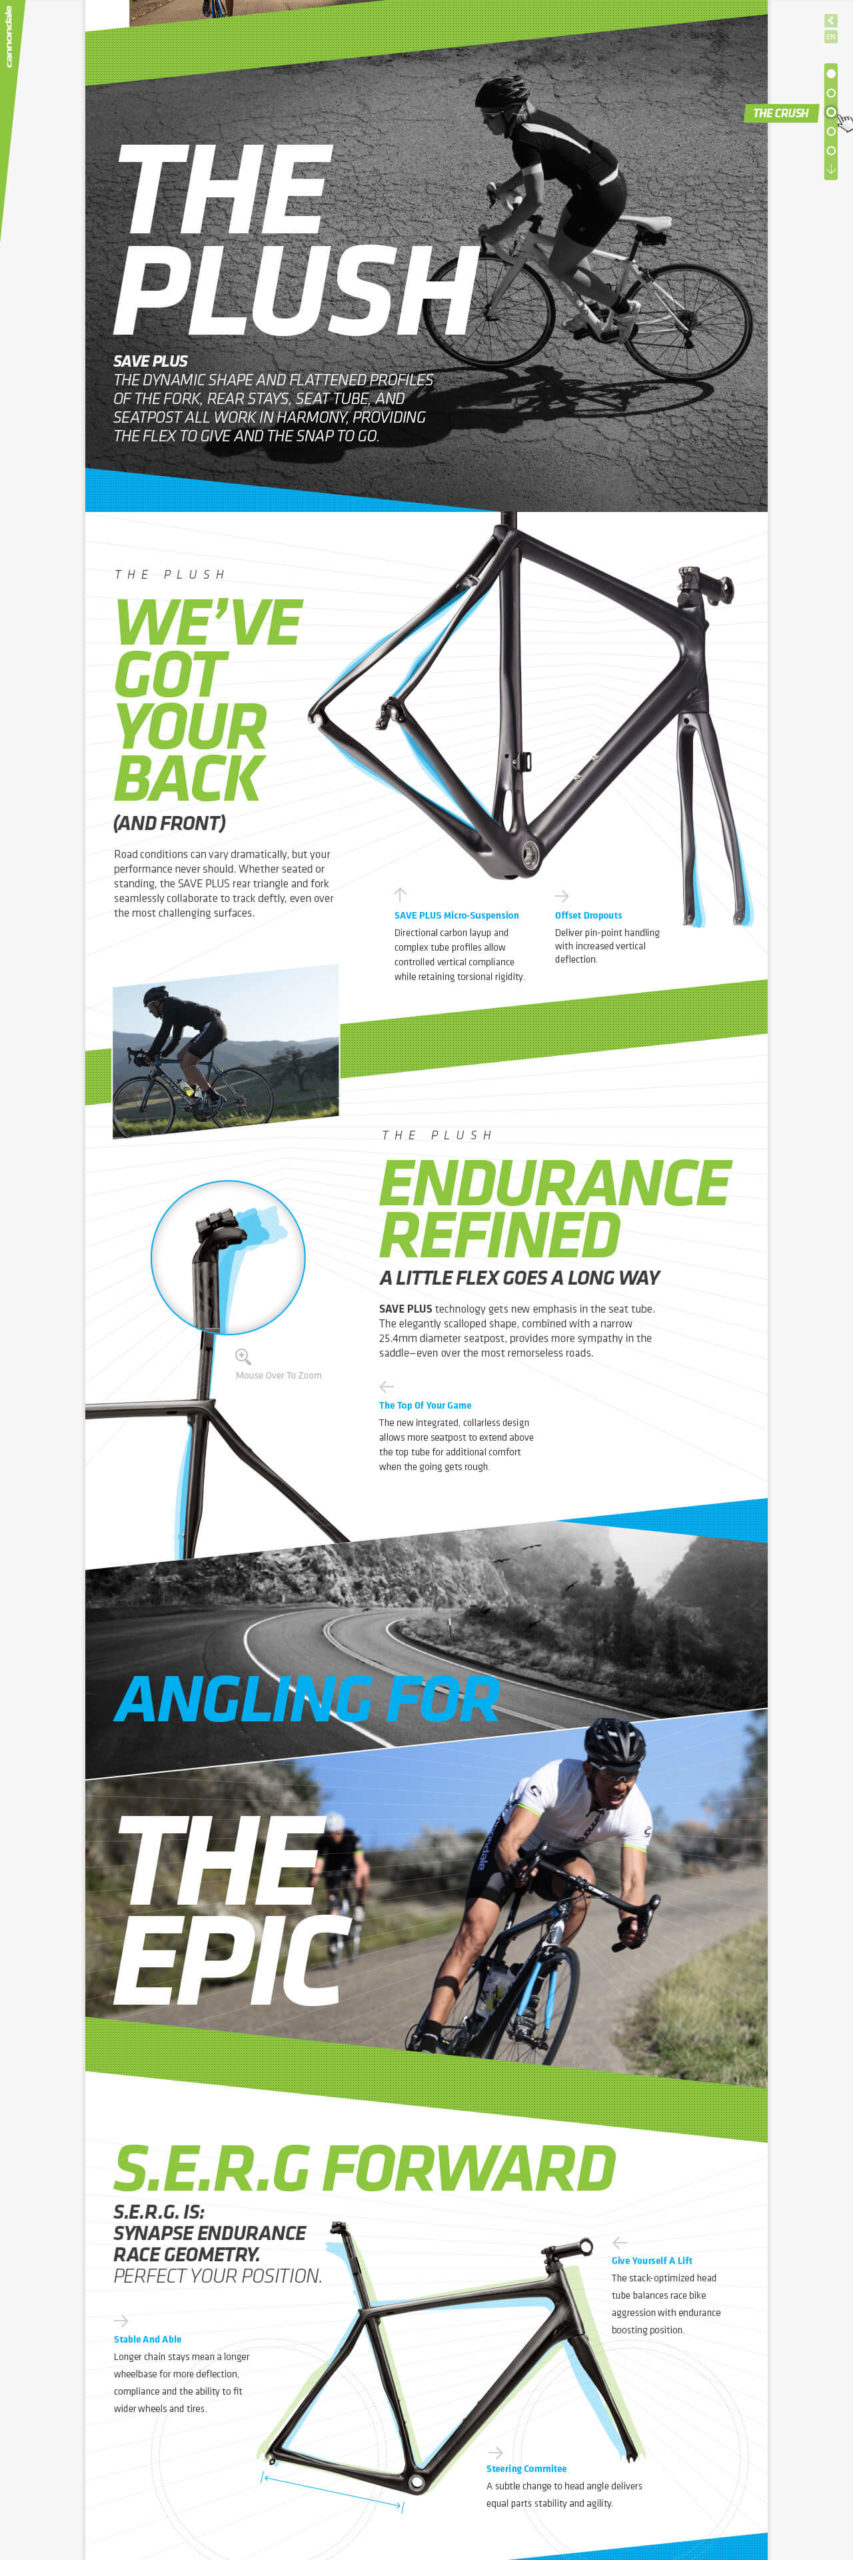 Cannondale Website